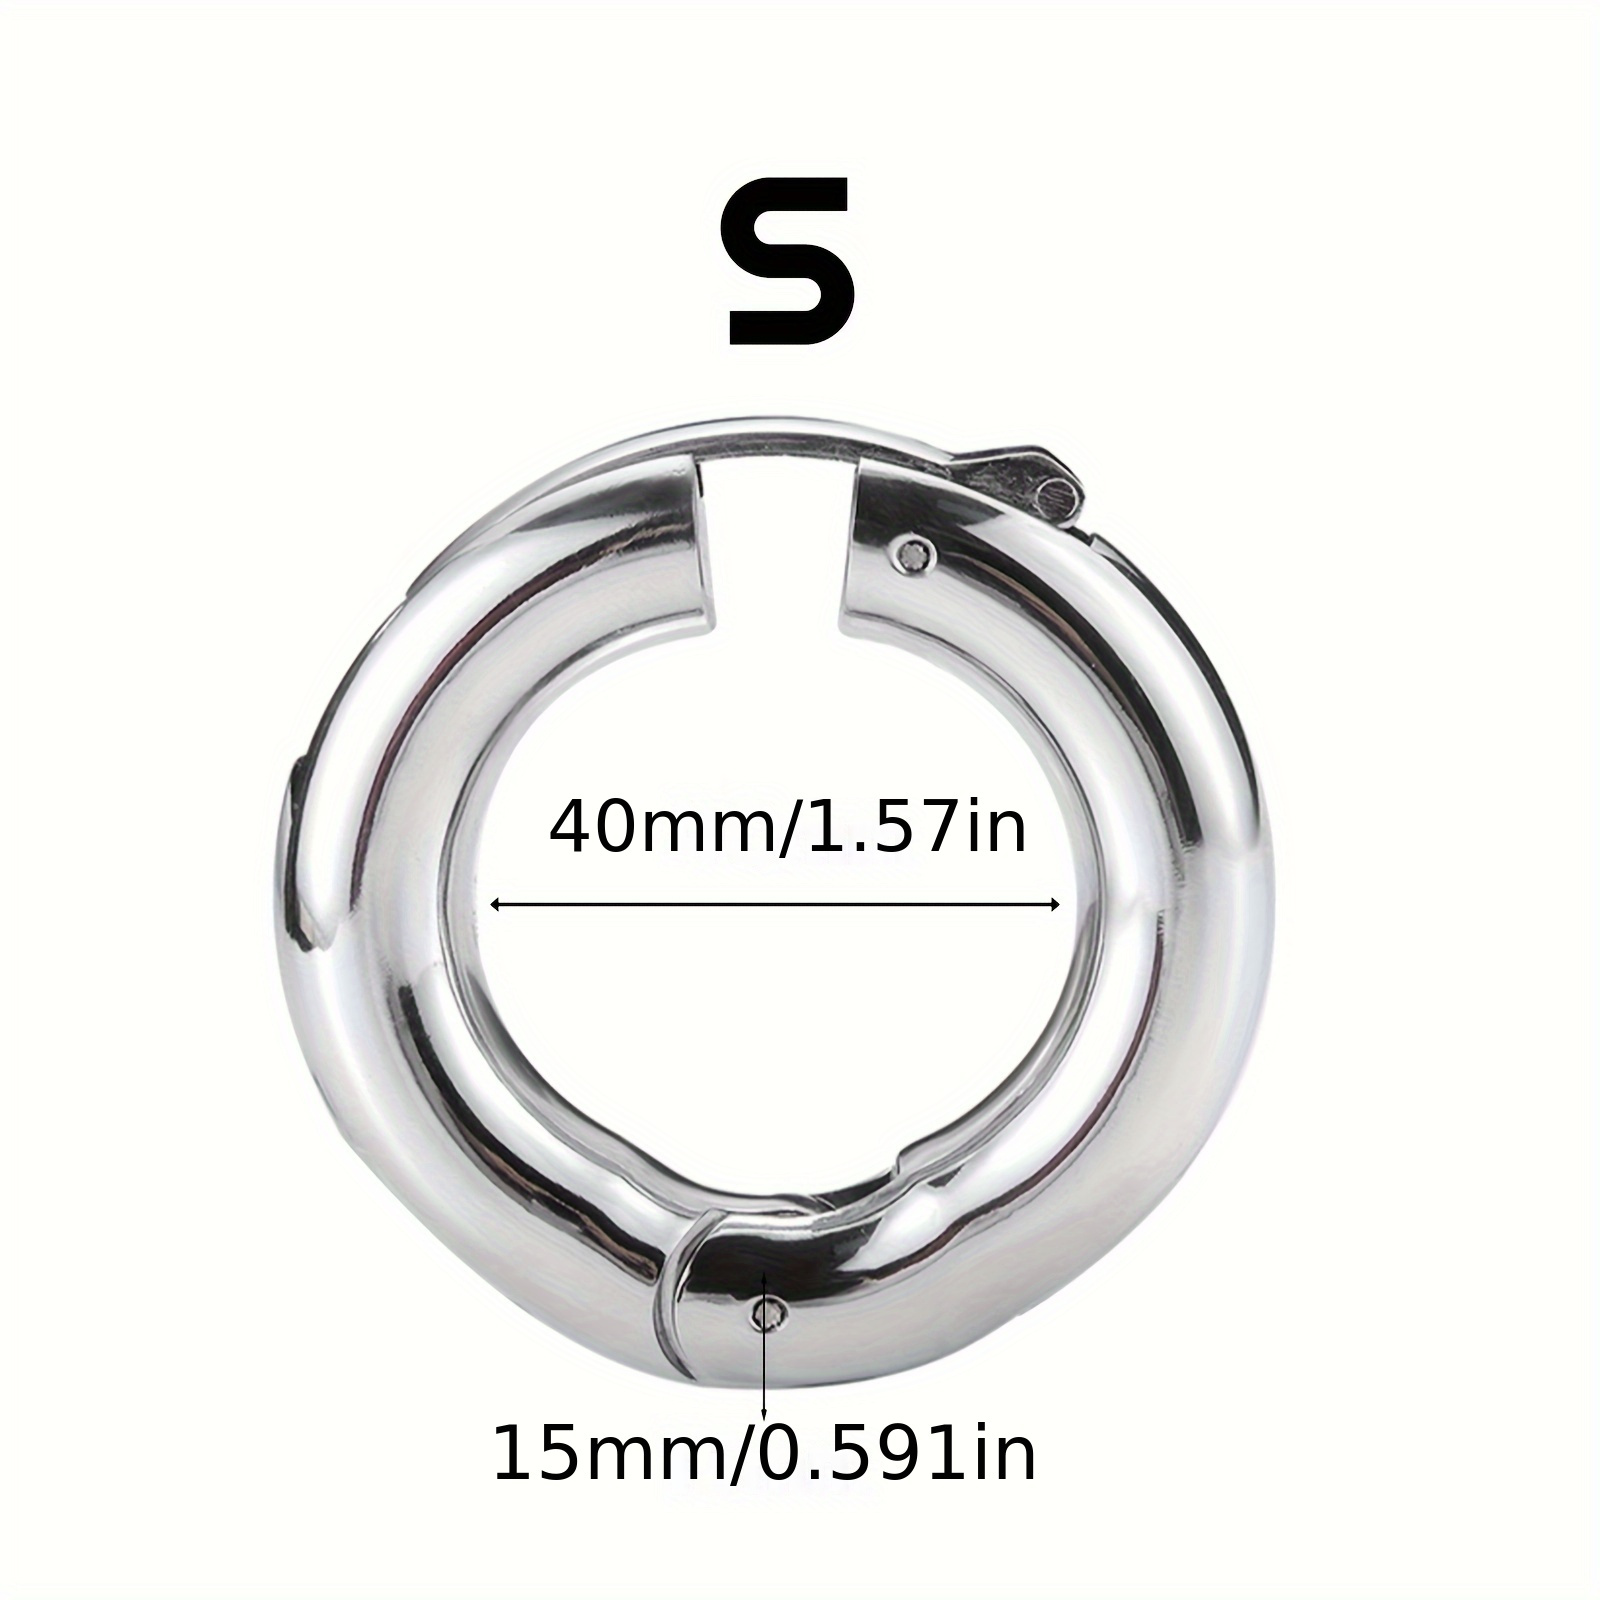 Stainless Steel Ball Weights Stretcher Delay testicle stretcher